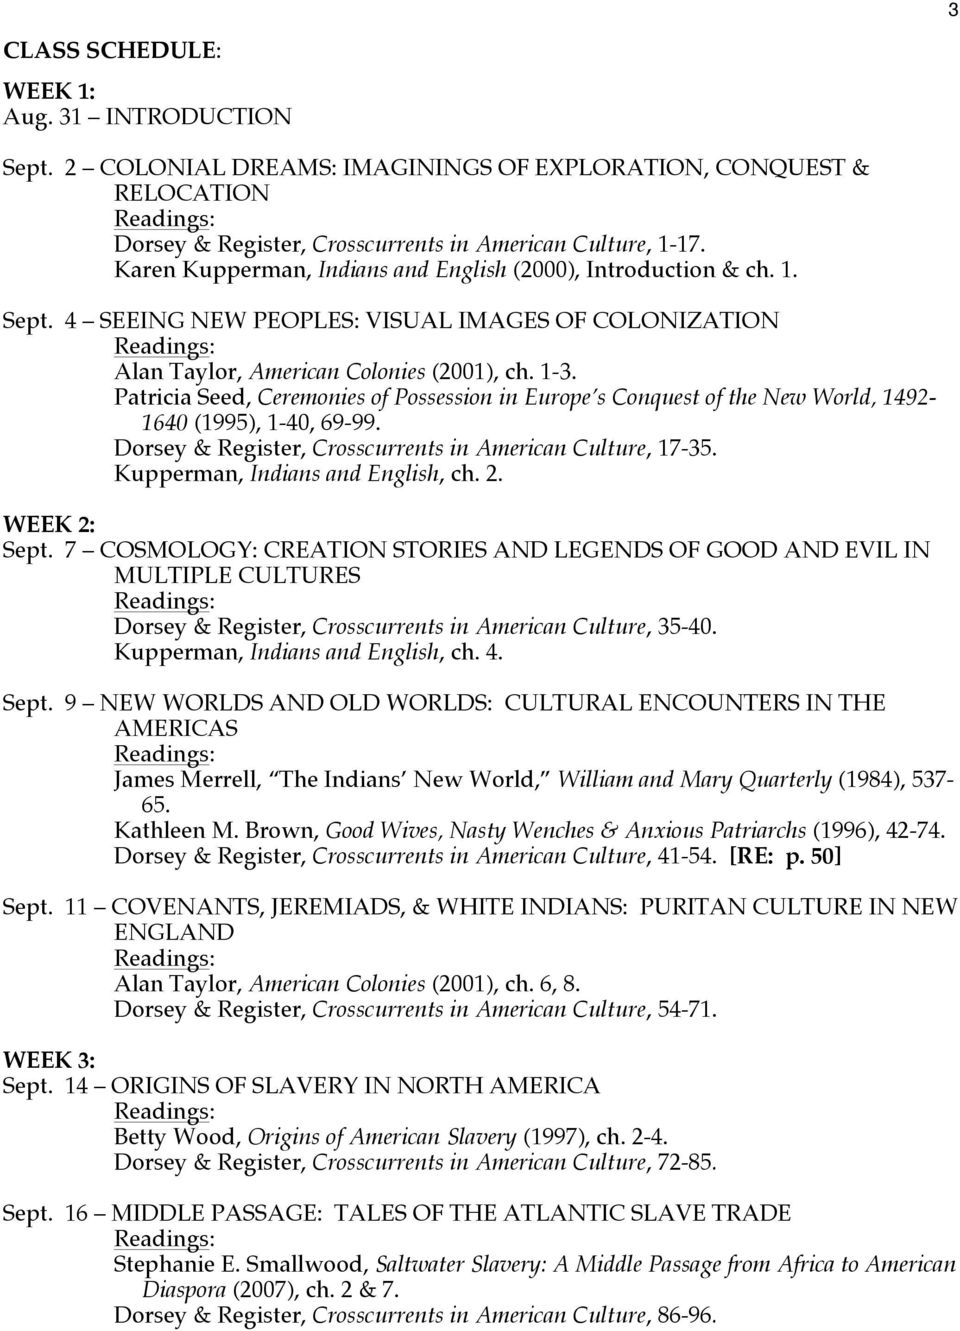 Patricia Seed, Ceremonies of Possession in Europe s Conquest of the New World, 1492-1640 (1995), 1-40, 69-99. Dorsey & Register, Crosscurrents in American Culture, 17-35.